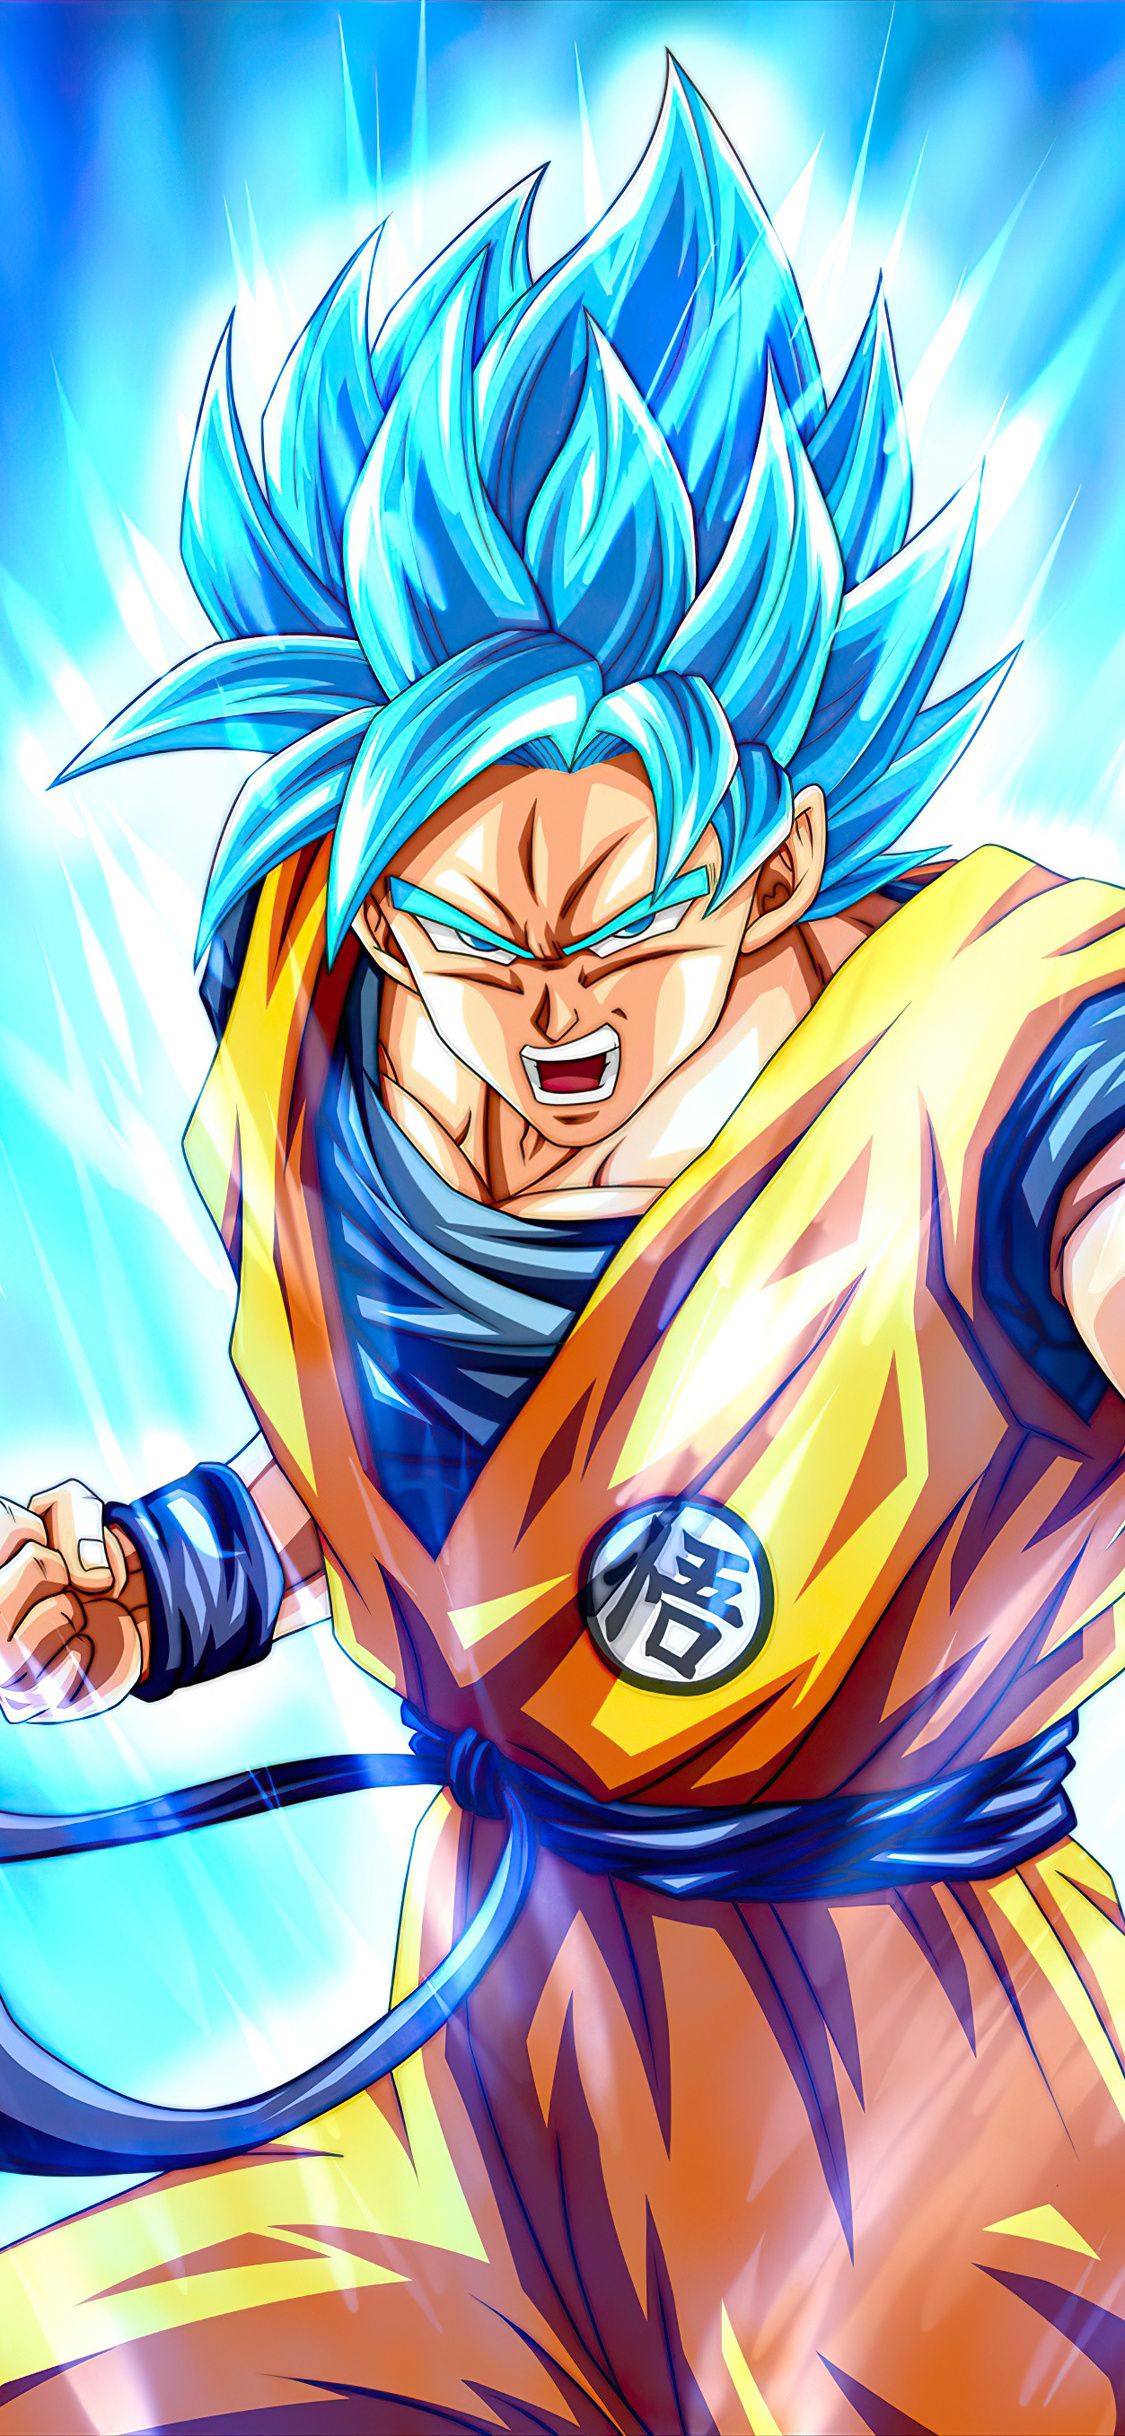 1125x2436 Dragon Ball Son Goku 4k Iphone XS,Iphone 10,Iphone X HD 4k Wallpapers, Image, Backgrounds, Photos and Pictures